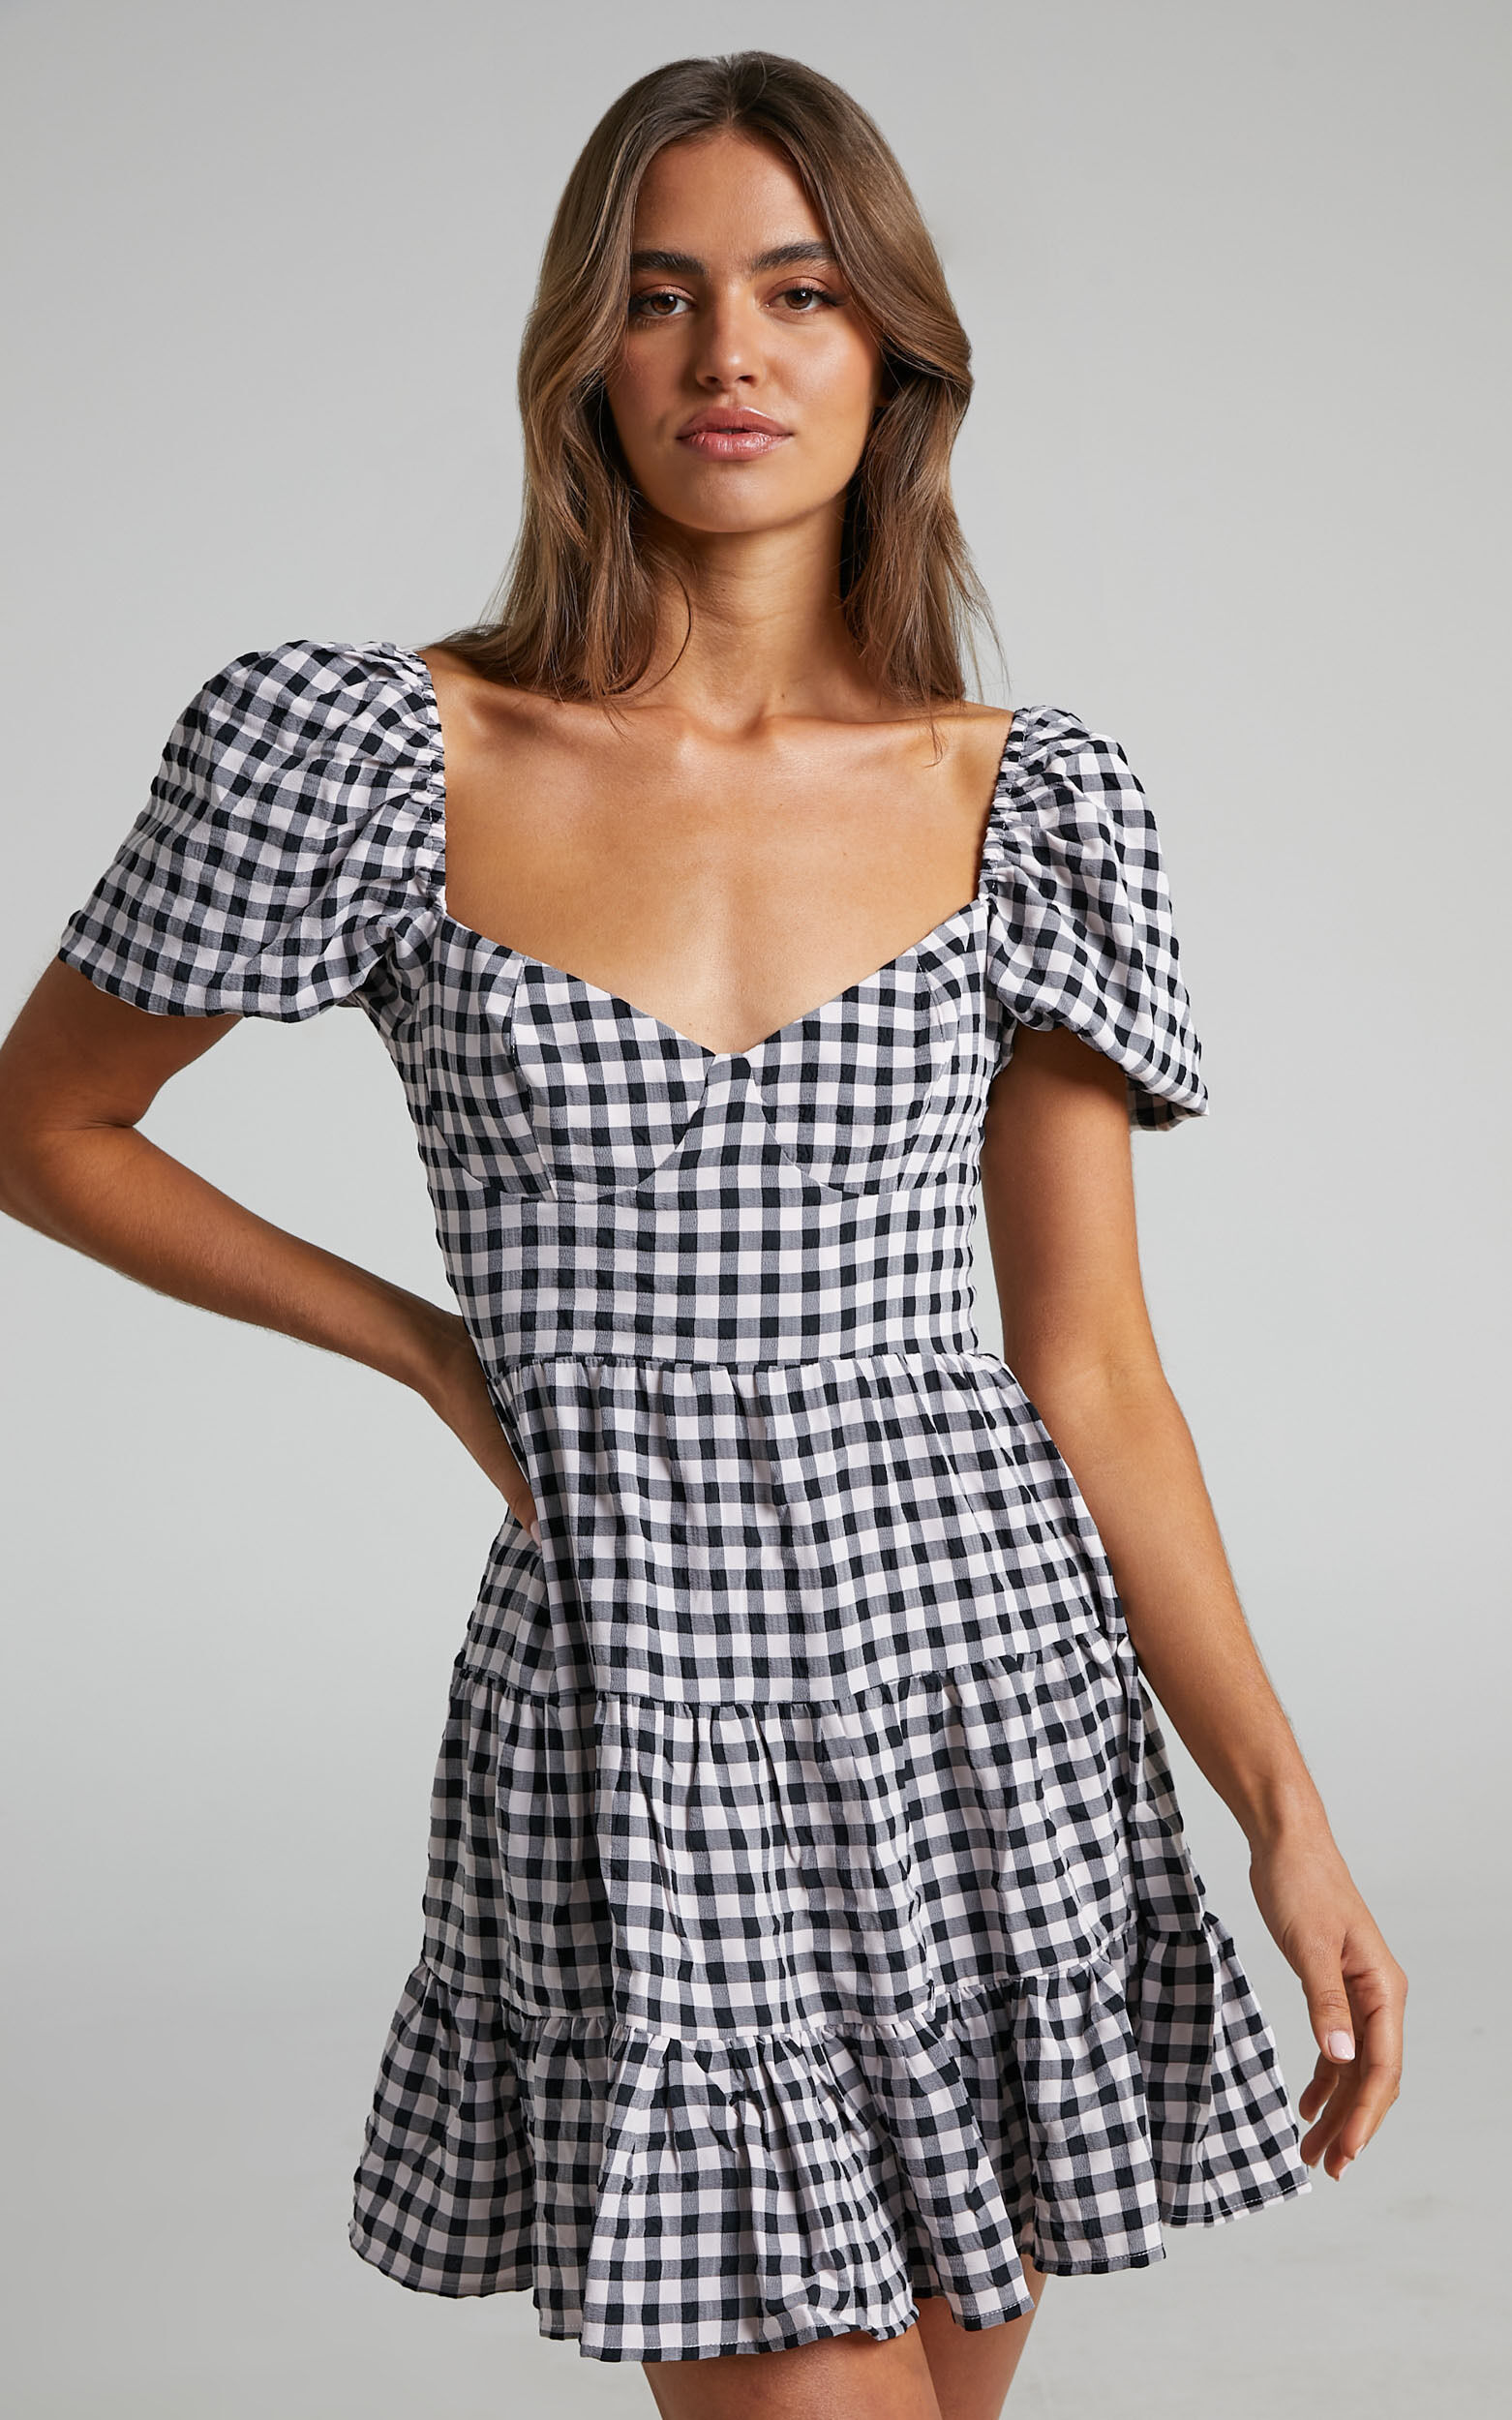 Mirai Sweetheart Tiered Puff Sleeve Mini Dress in Black and White Check - 06, BLK1, super-hi-res image number null